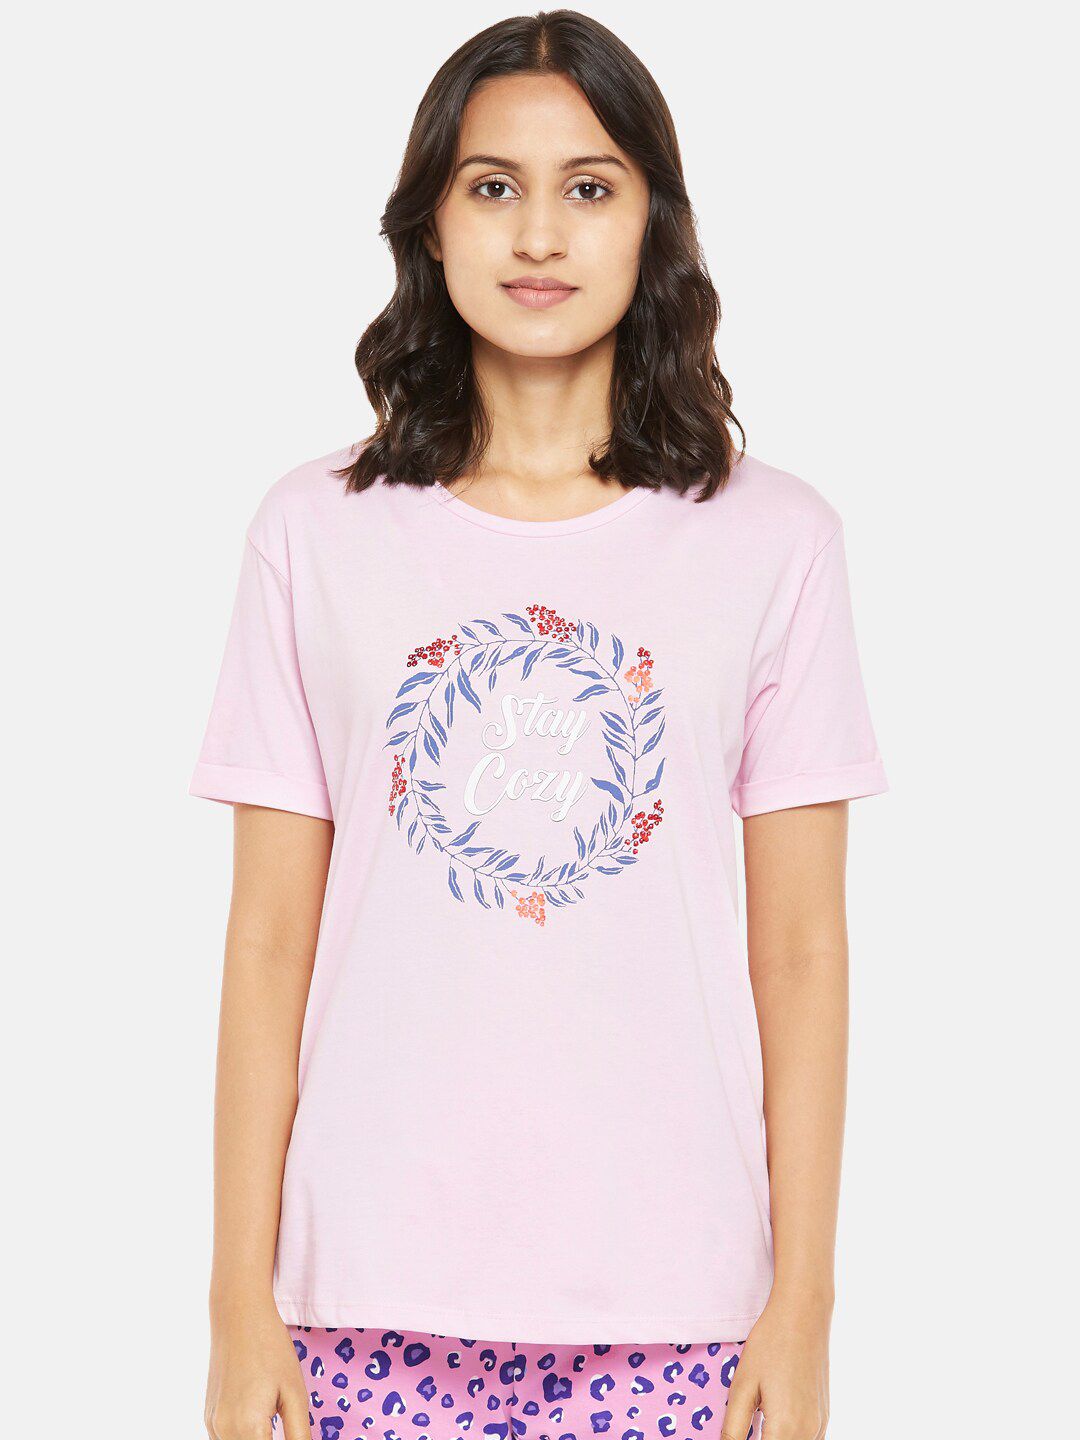 Dreamz by Pantaloons Women Pink & White Typography Printed Cotton Lounge T-shirt Price in India